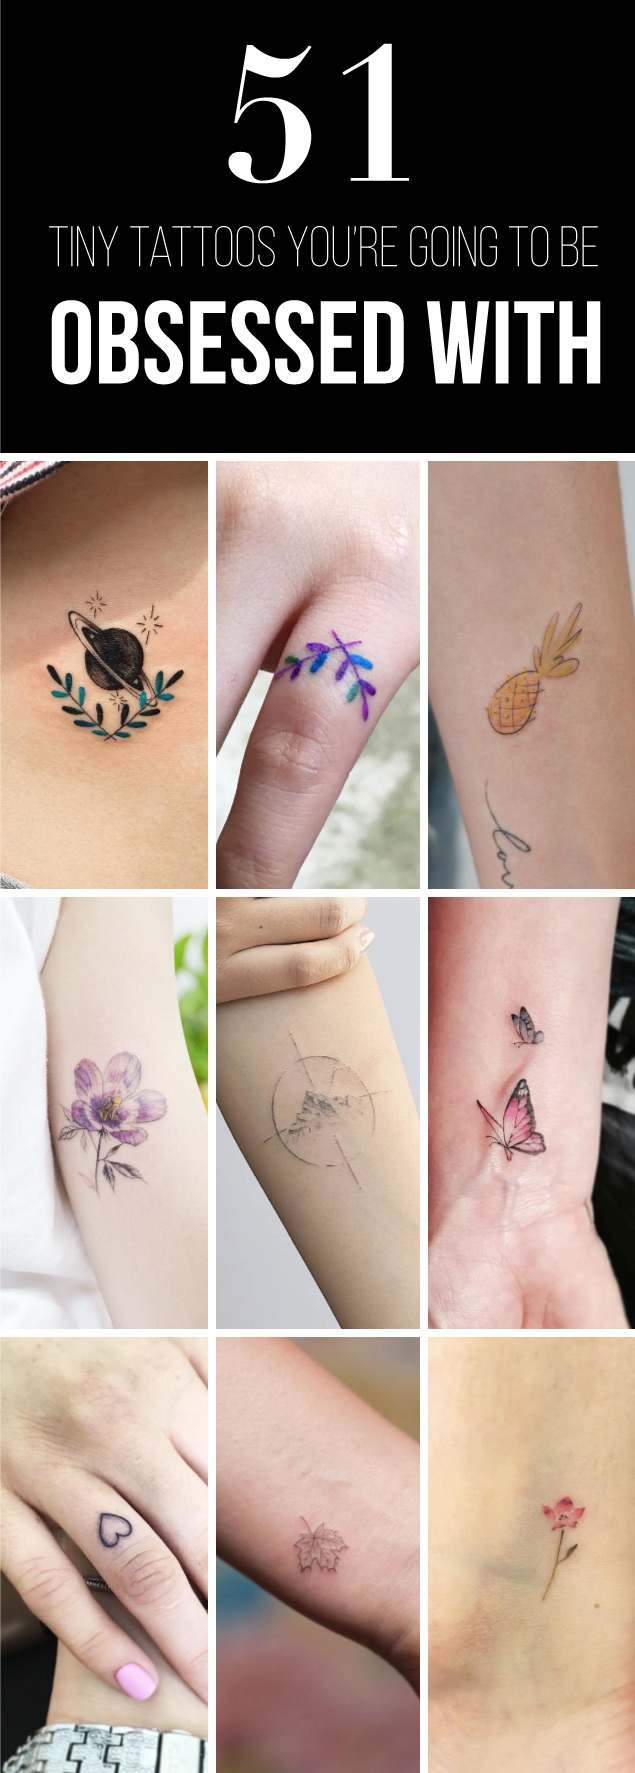 51 Tiny Tattoo Designs You're Going To Be Obsessed With | TattooBlend